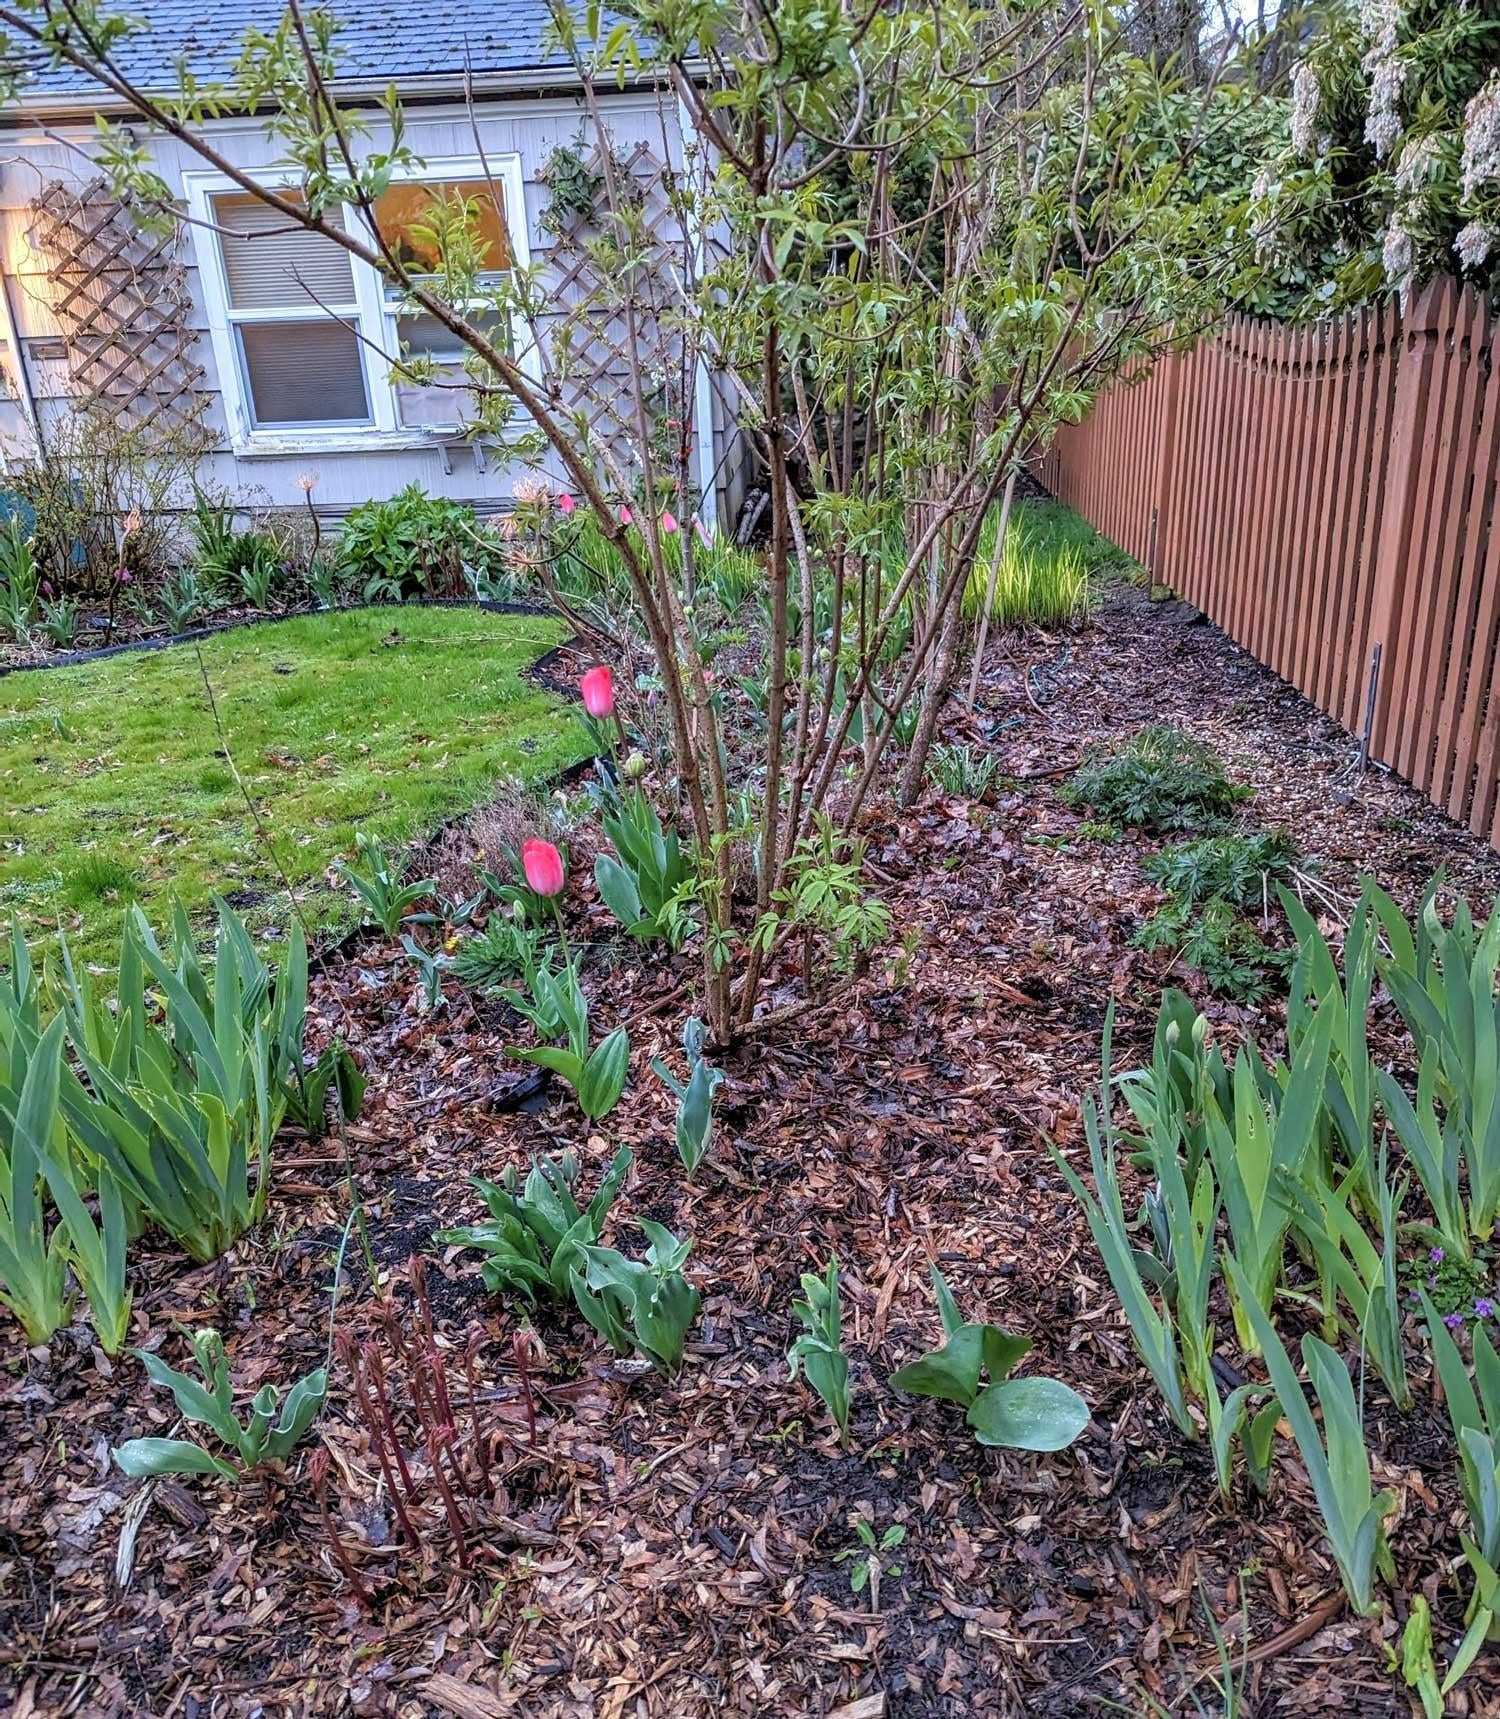 There's a lot of bare spots here for possible tulips next year.  (Image: Amanda Blum)